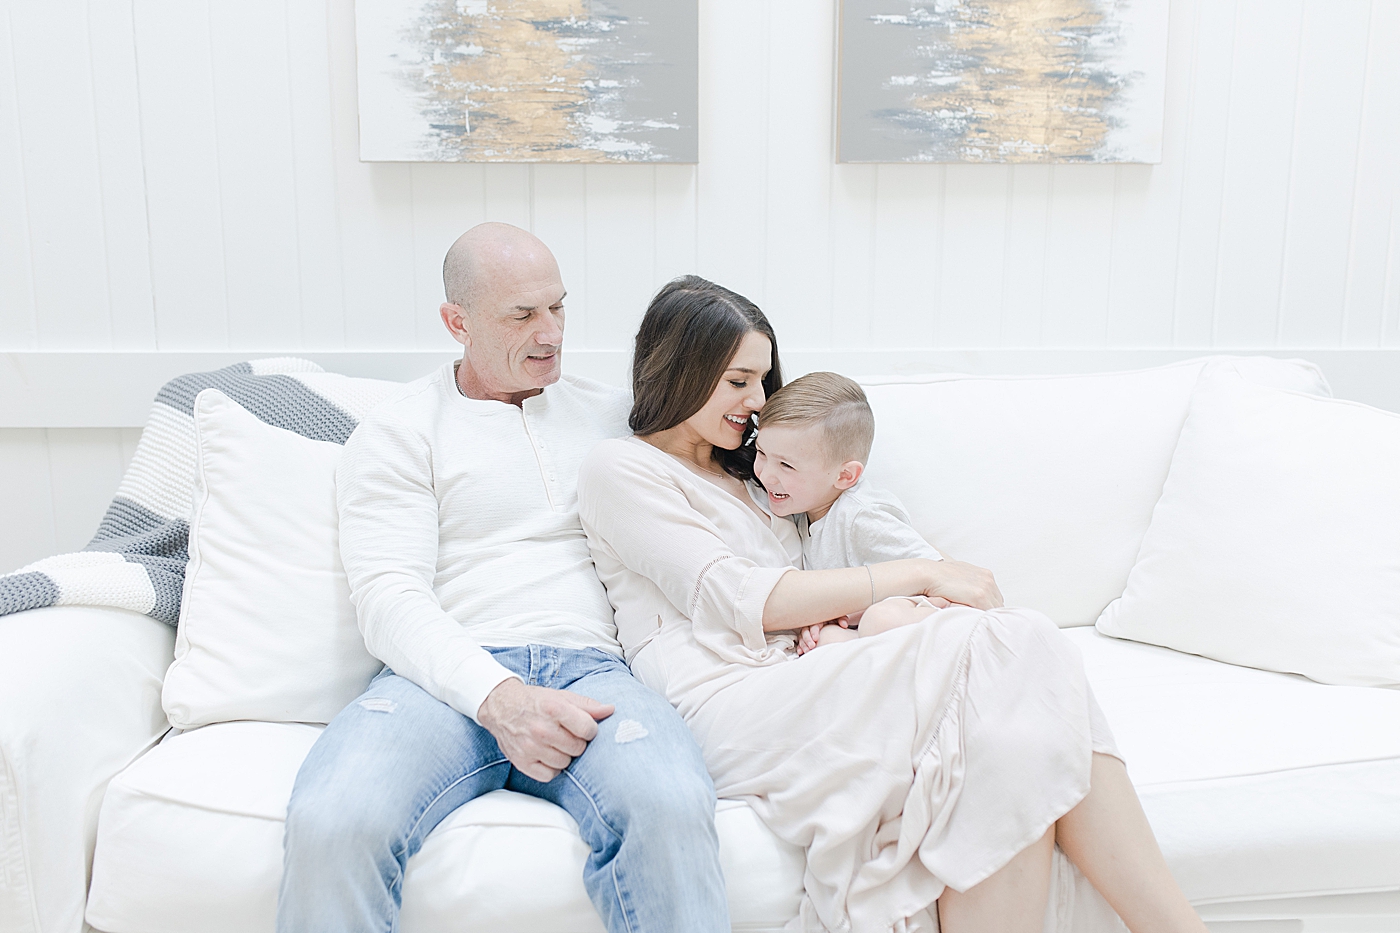 Mom, Dad and son on couch during family photoshoot in their home. Photo by Little Sunshine Photography